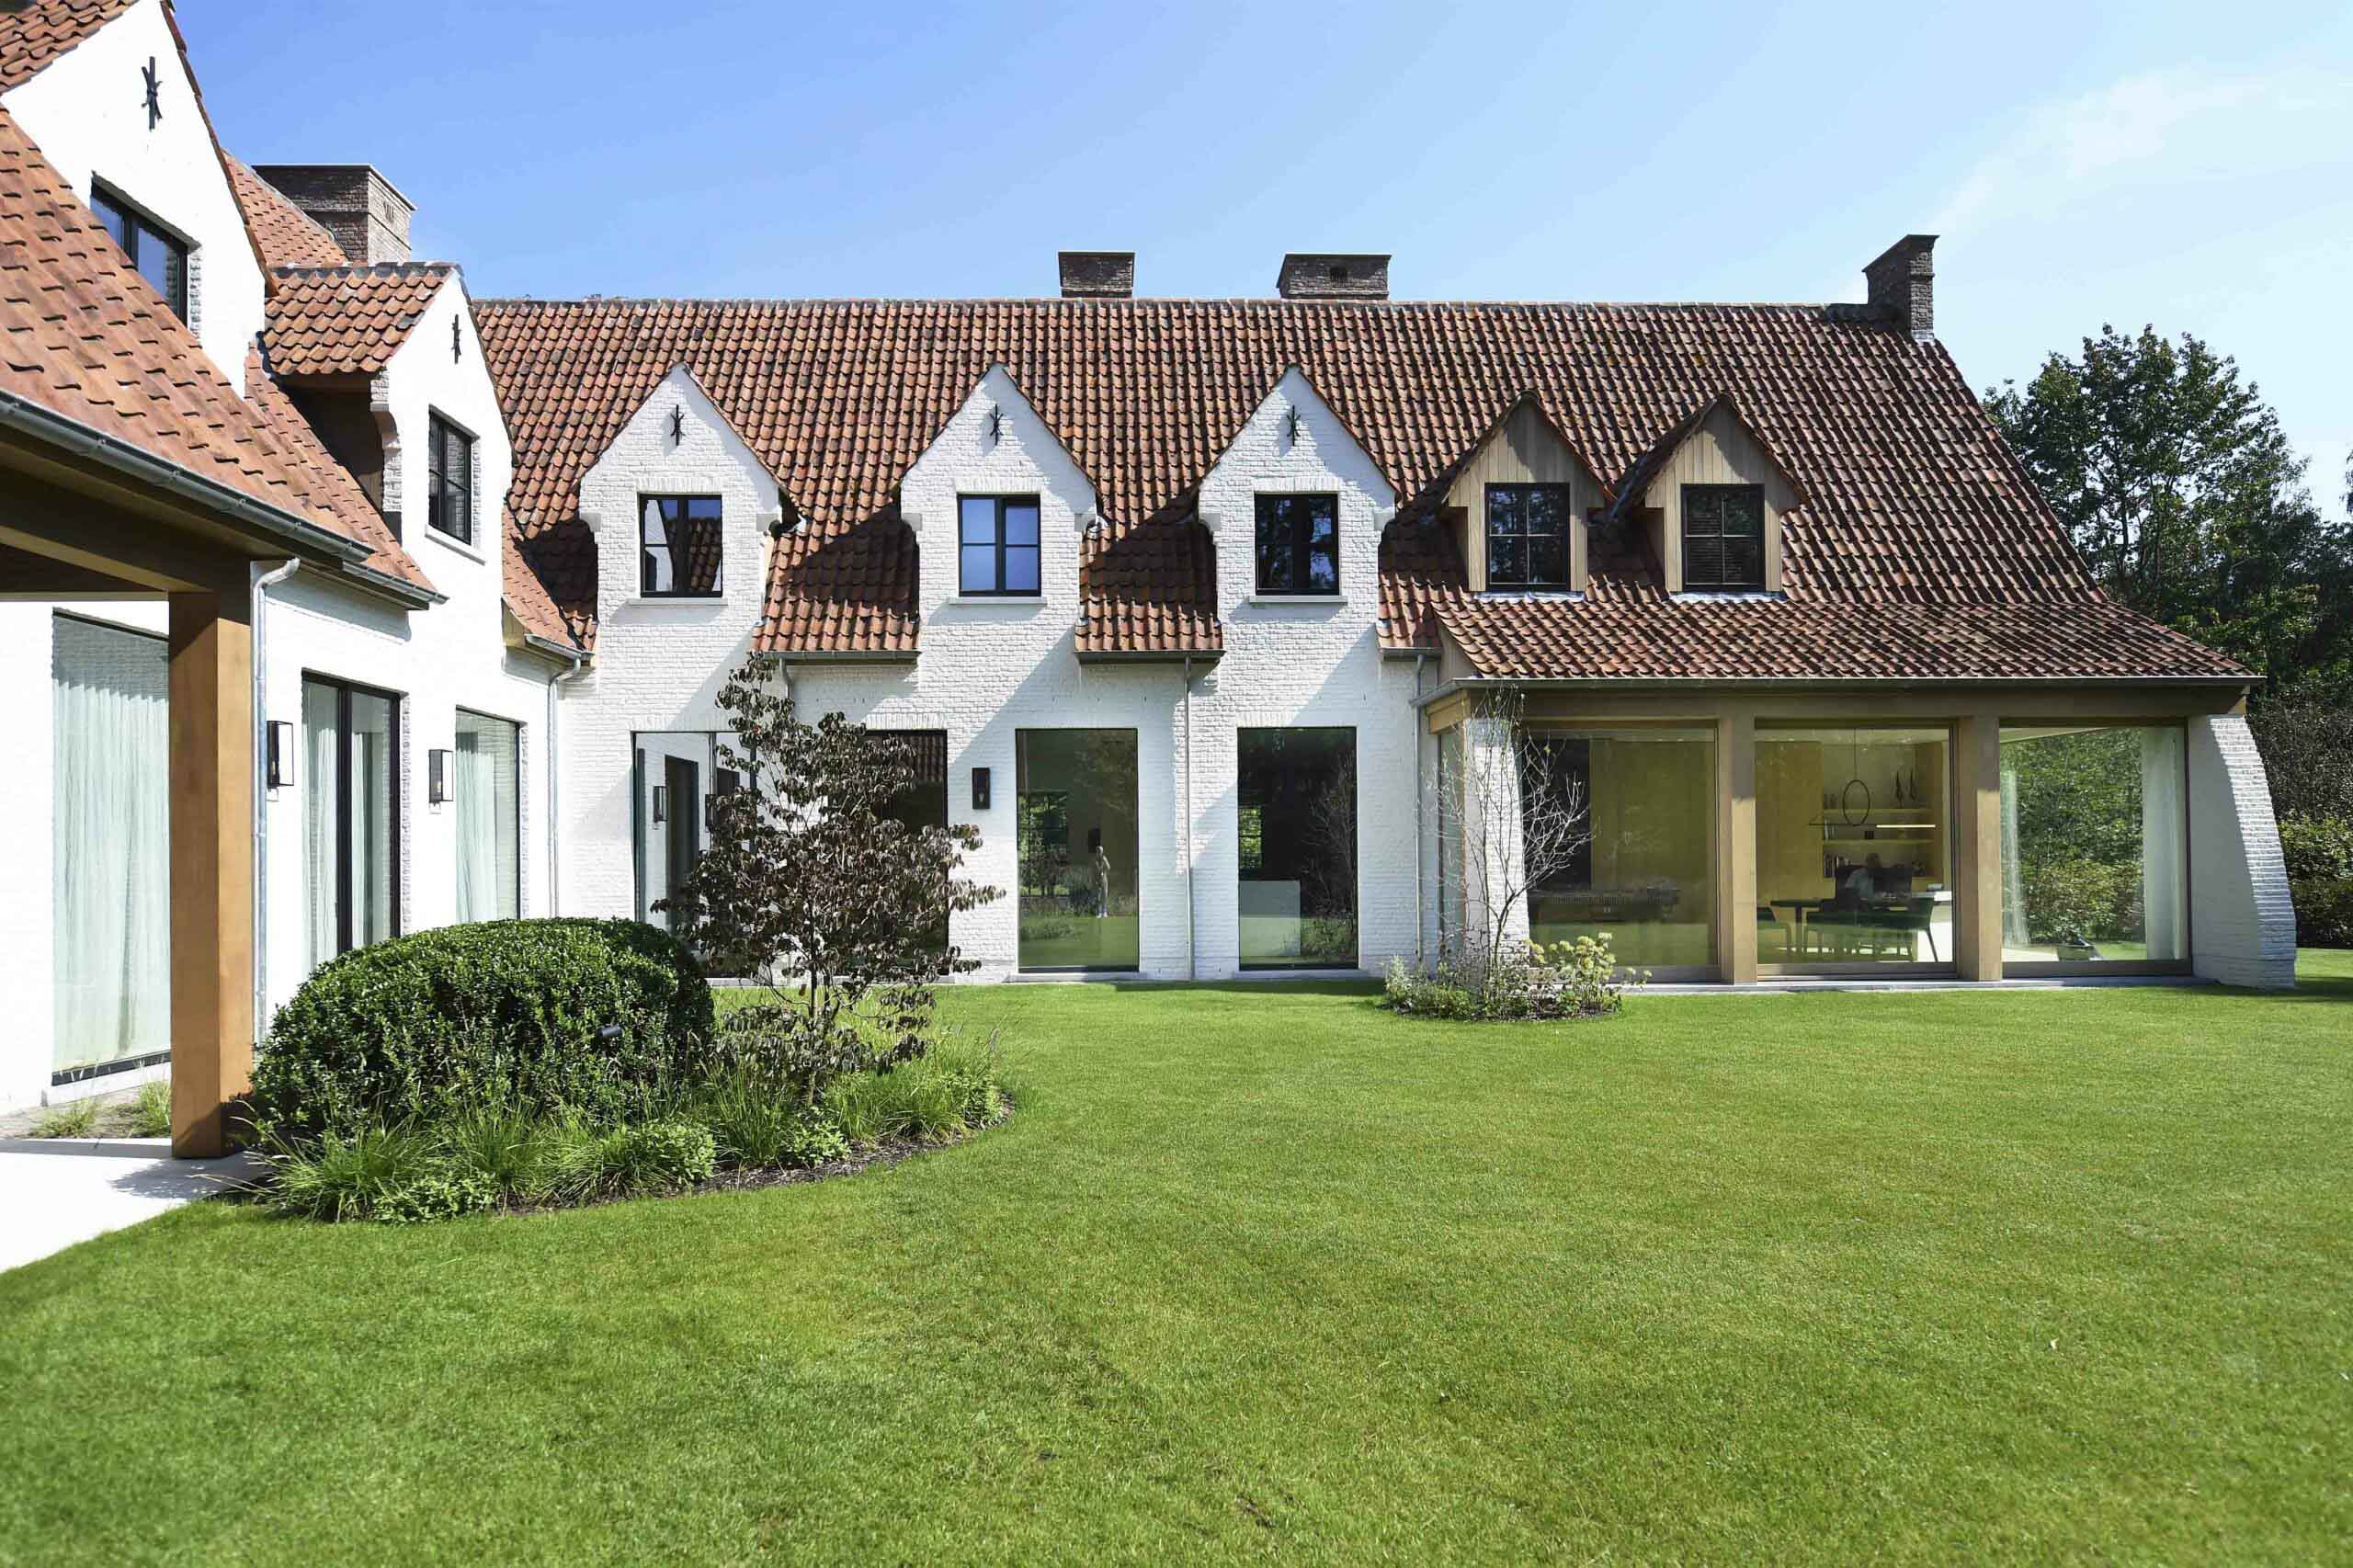 A beautiful white brick house with a tiled roof, featuring a modern glass extension. The well-manicured garden includes a lush green lawn and a variety of plants.